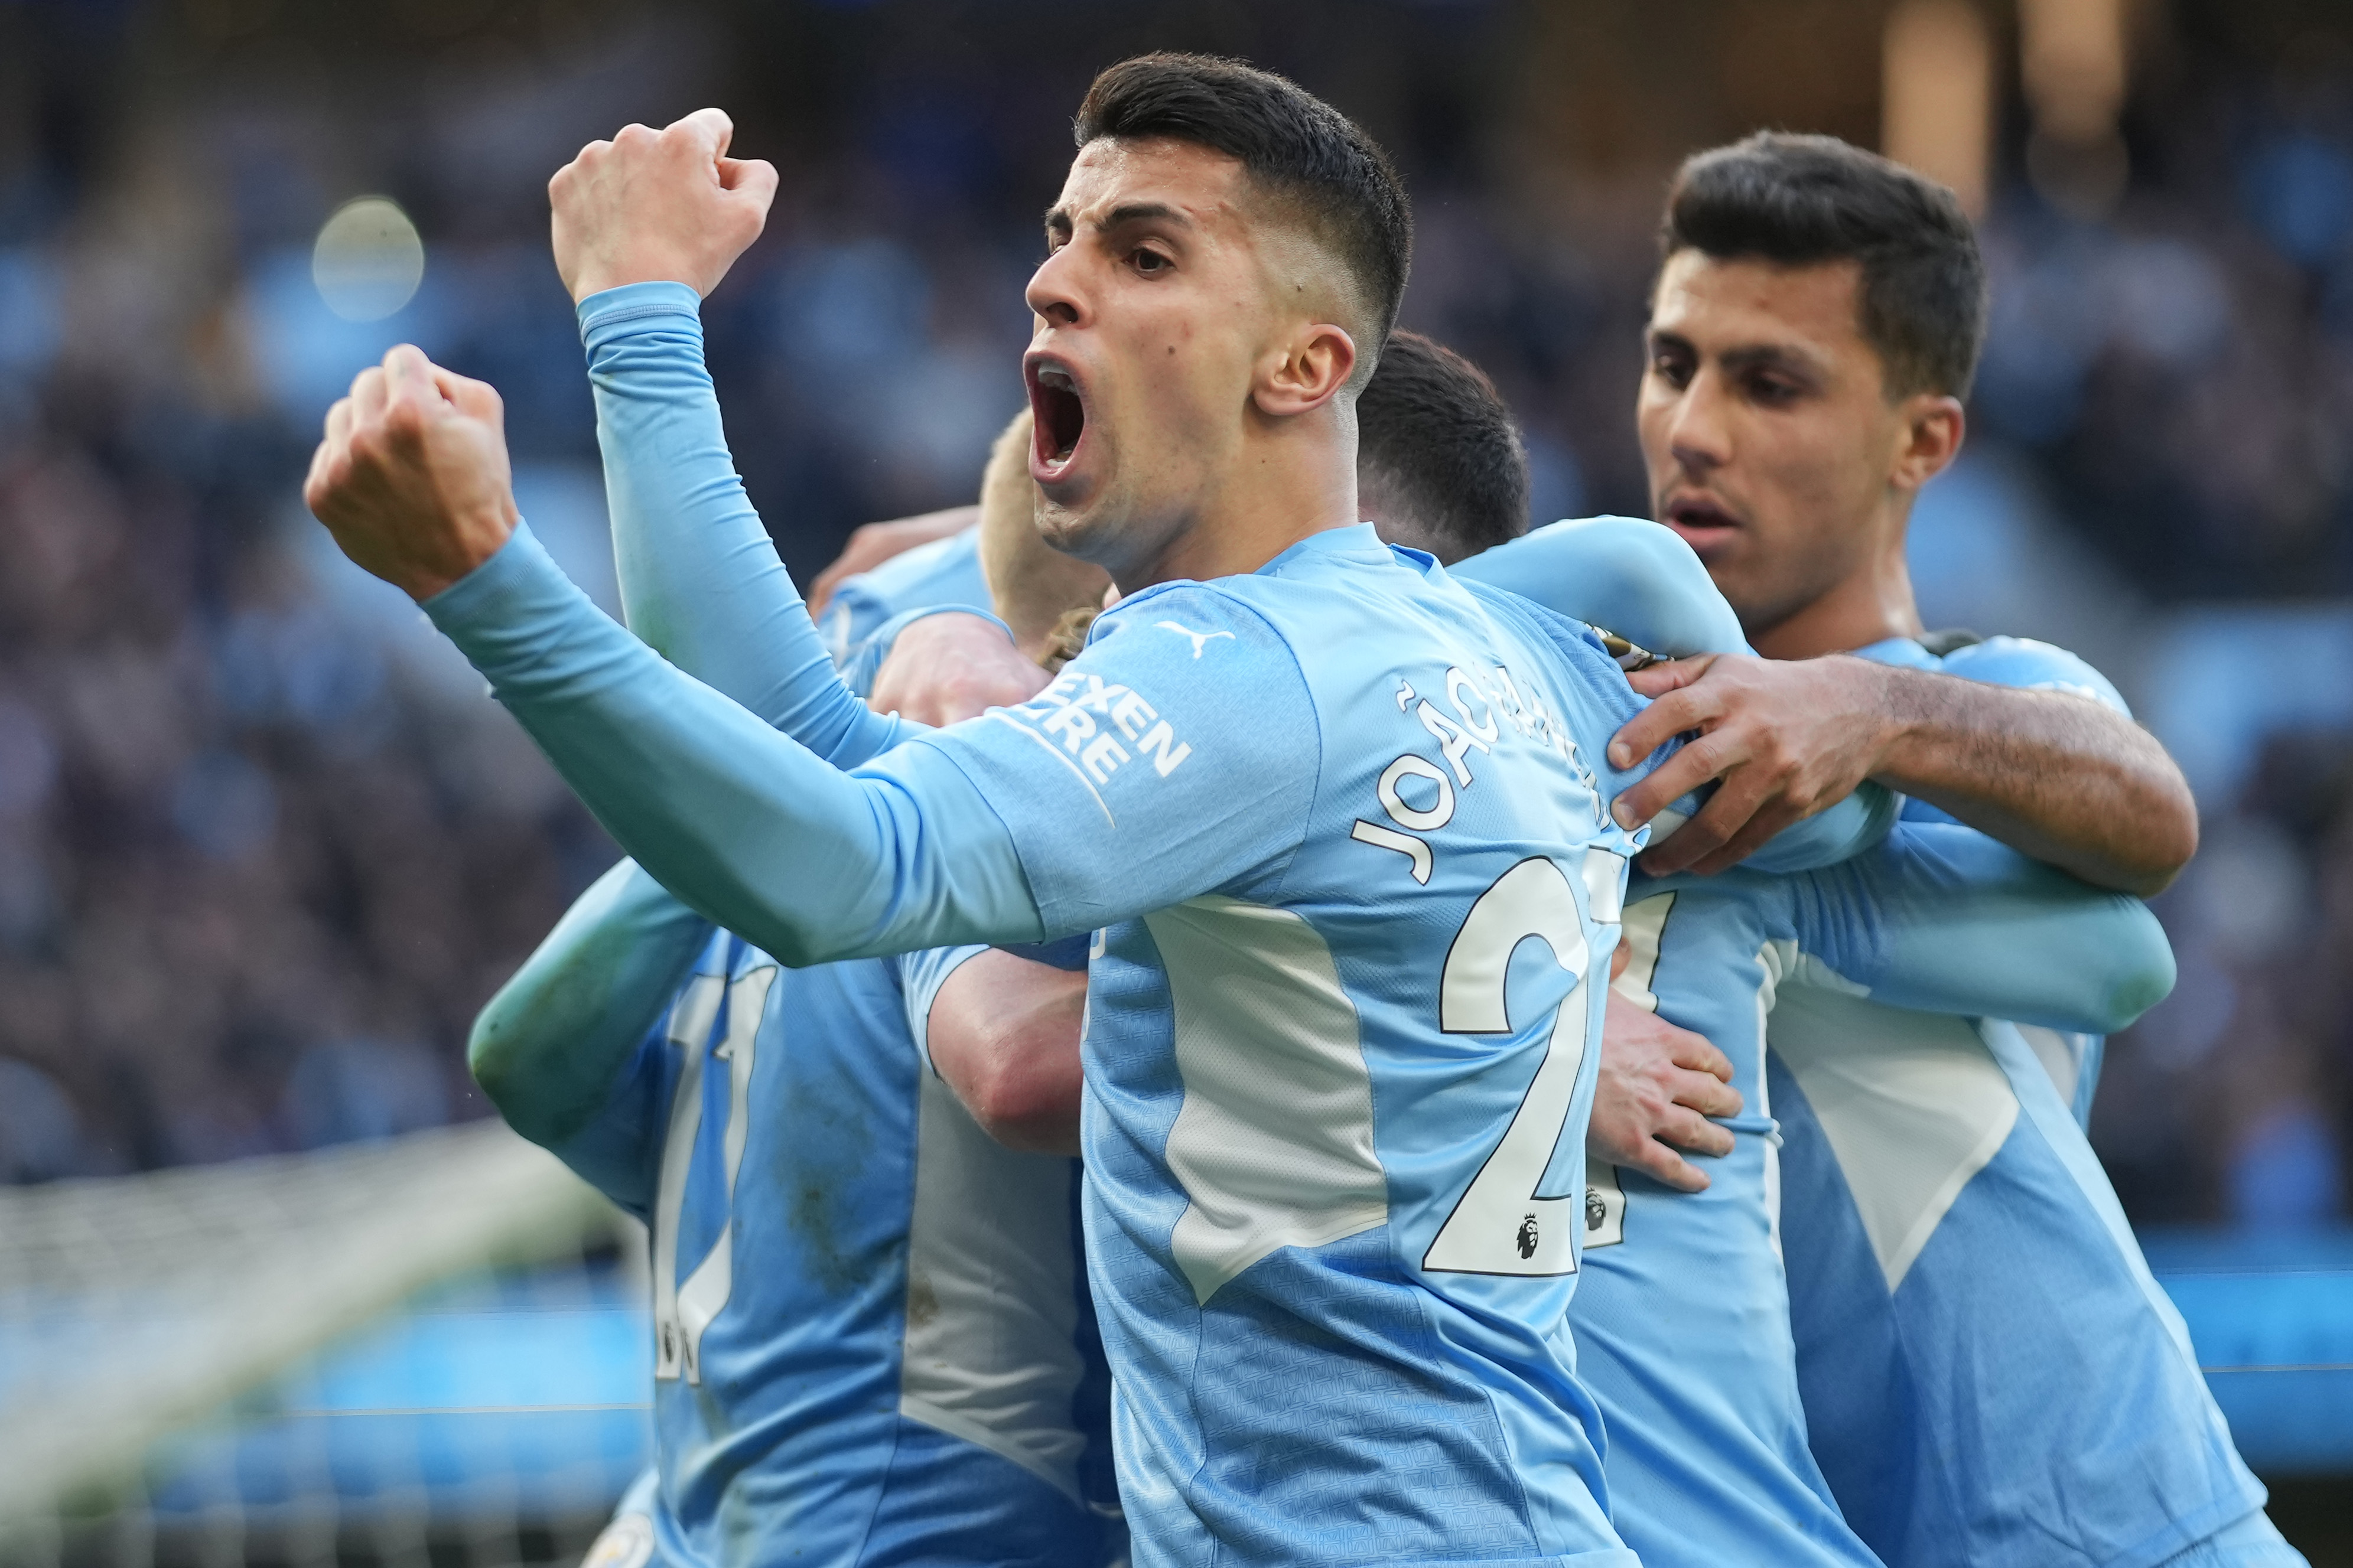 Manchester City 4-1 Manchester United: - Man United's fightback washed away by dominant Man City who extend their lead to six points as 'Manchester is Blue'